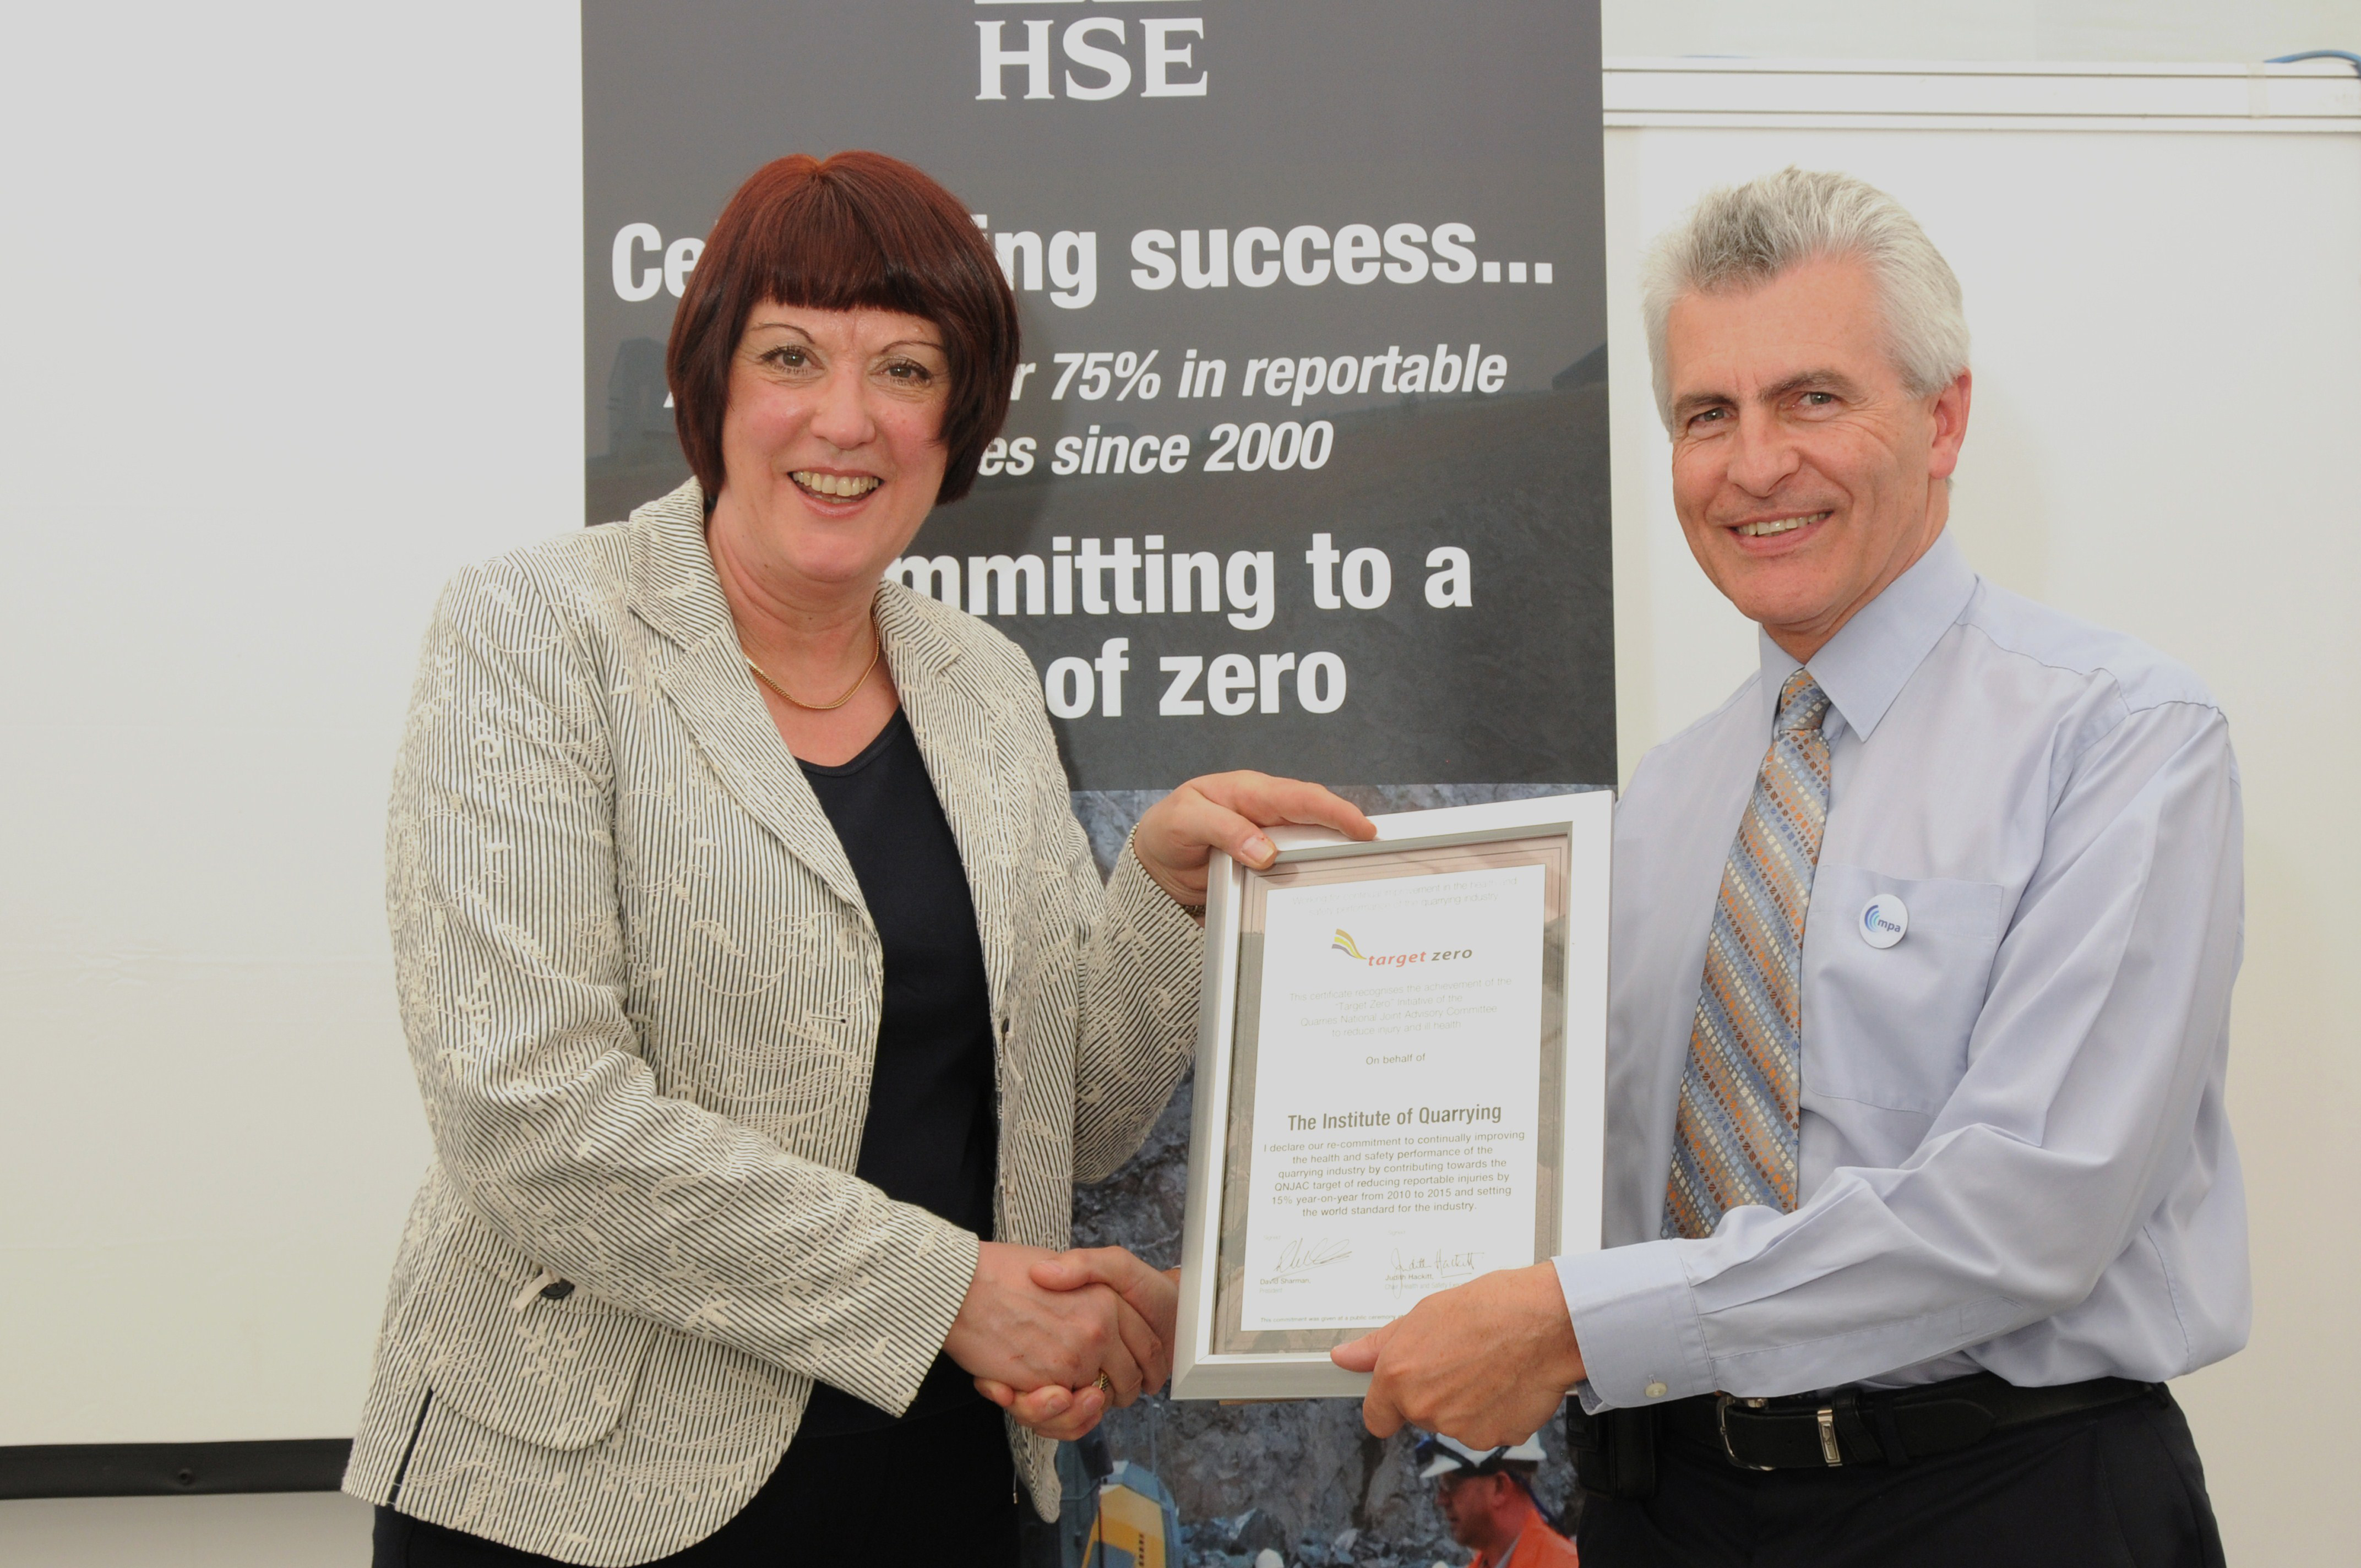 Martin Isles receives a signed "recommitment to Target Zero" certificate